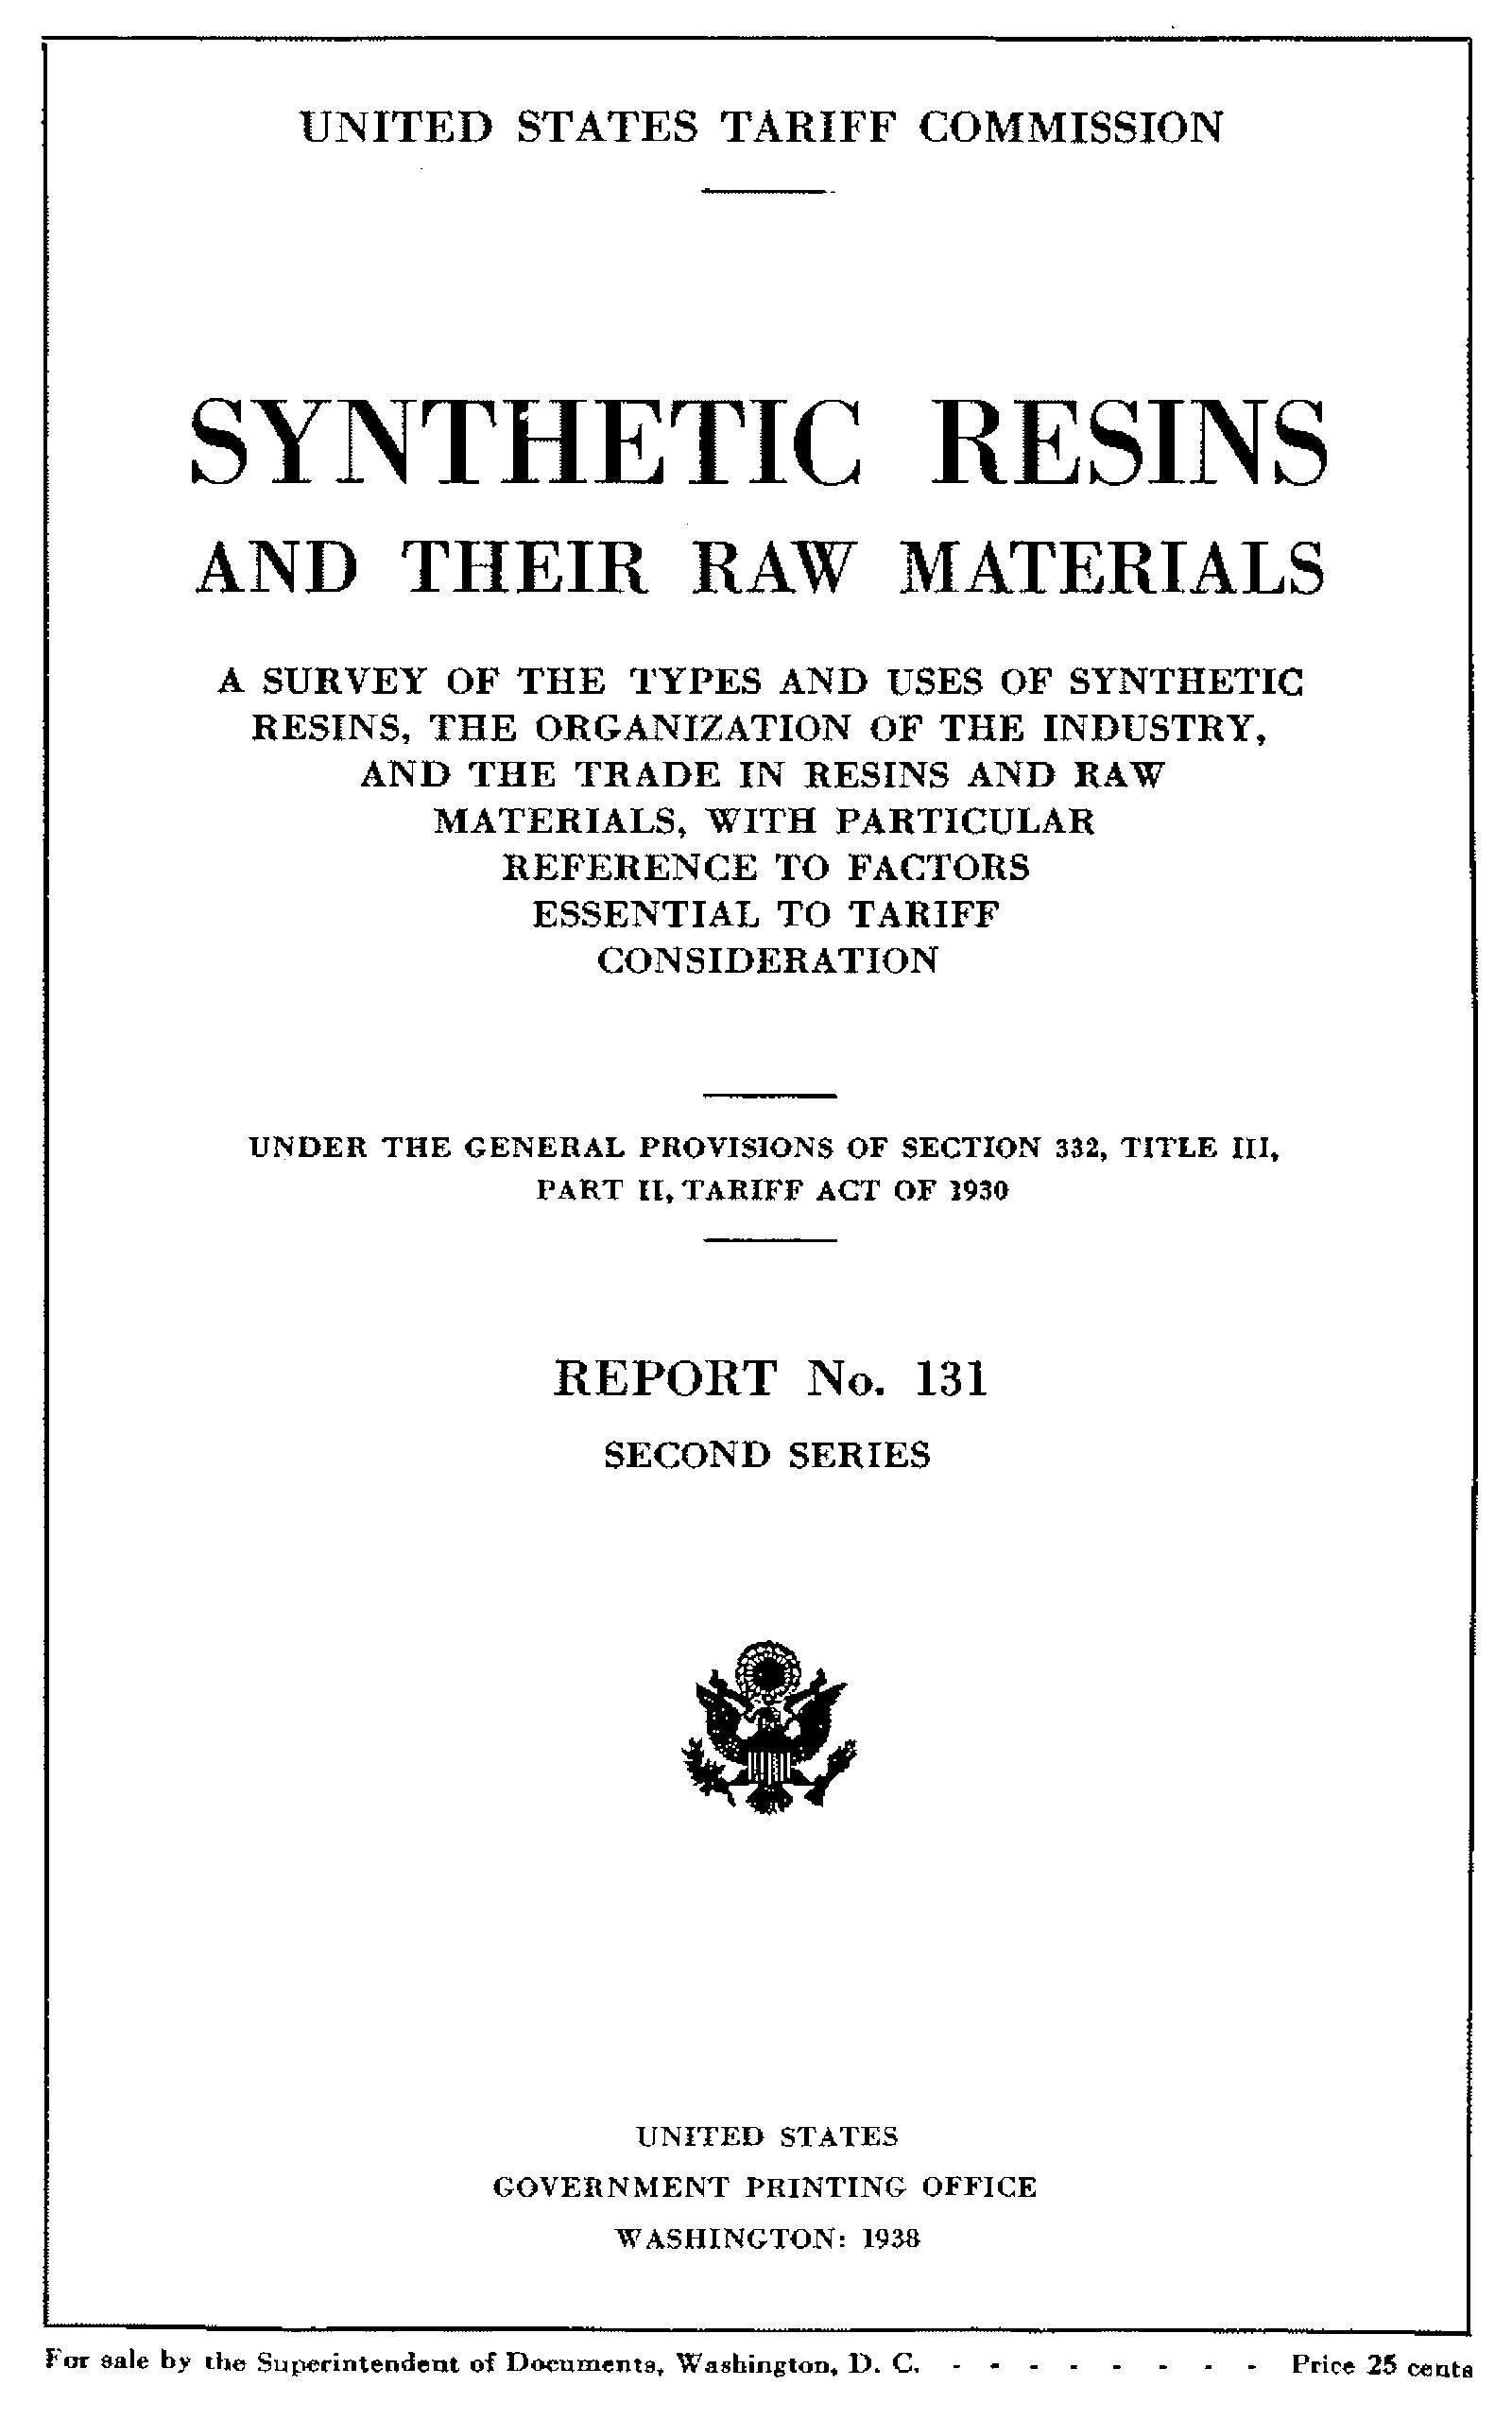 Synthetic resins and their raw materials&#10;A survey of the types and uses of synthetic resins, the organization of the industry, and the trade in resins and raw materials, with particular references to factors essential to tariff consideration. Under the general provisions of section 332, title III, part II, Tariff act of 1930.